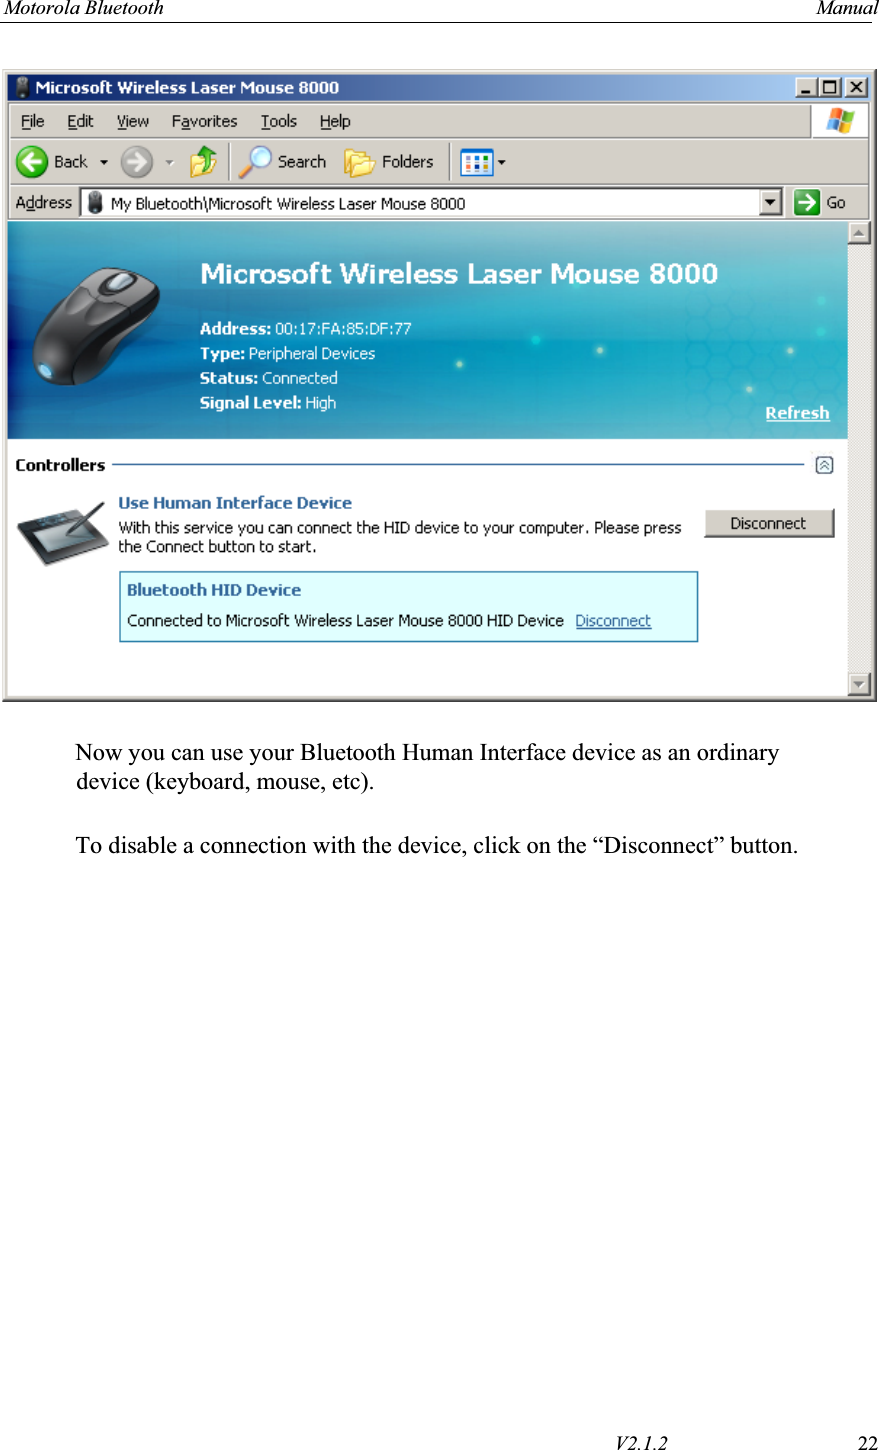 Motorola Bluetooth    Manual       V2.1.2  22Now you can use your Bluetooth Human Interface device as an ordinary device (keyboard, mouse, etc). To disable a connection with the device, click on the “Disconnect” button. 